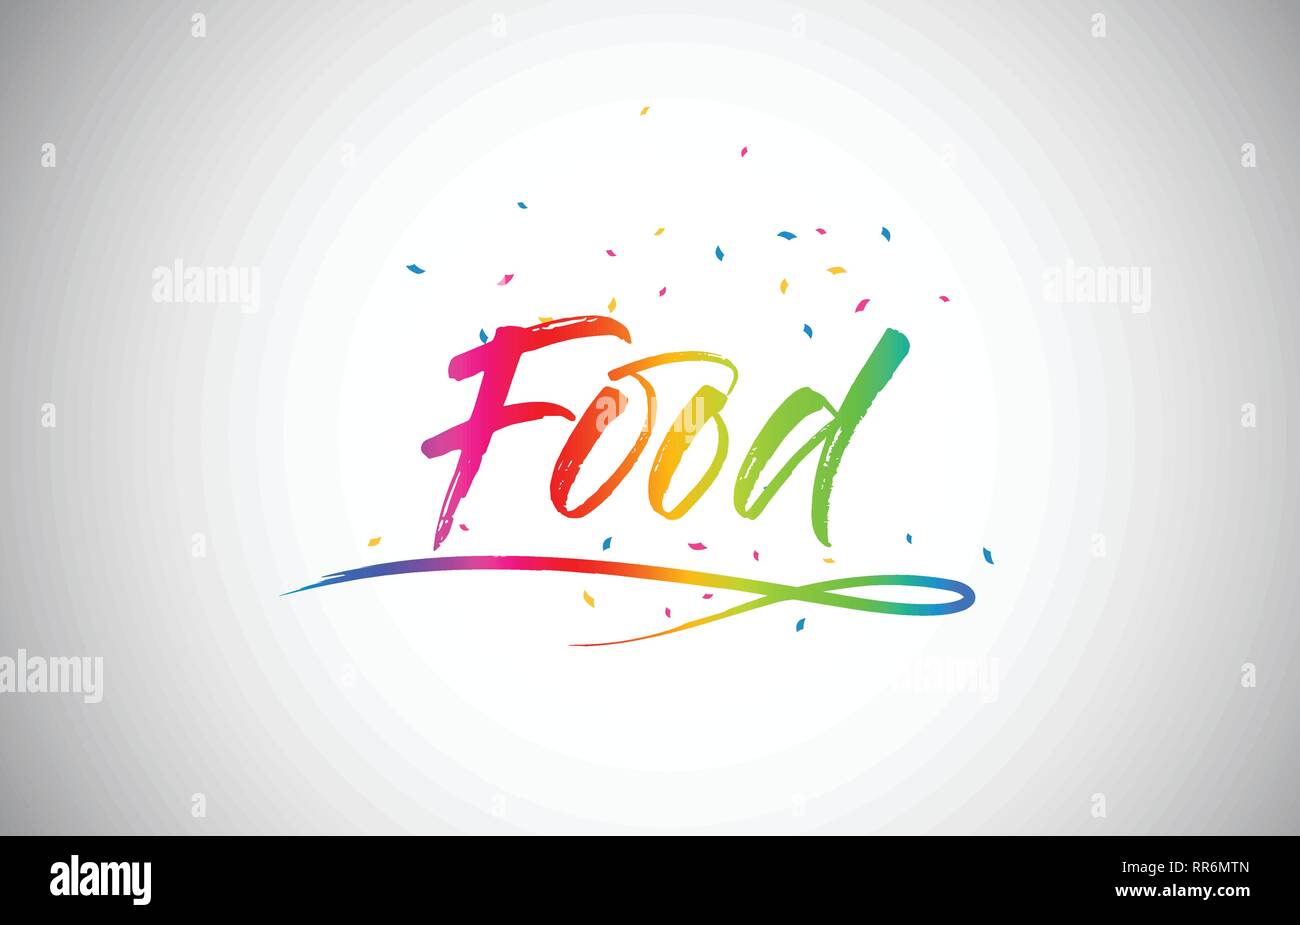 Food Creative Word Text with Handwritten Rainbow Vibrant Colors and Confetti Vector Illustration. Stock Vector